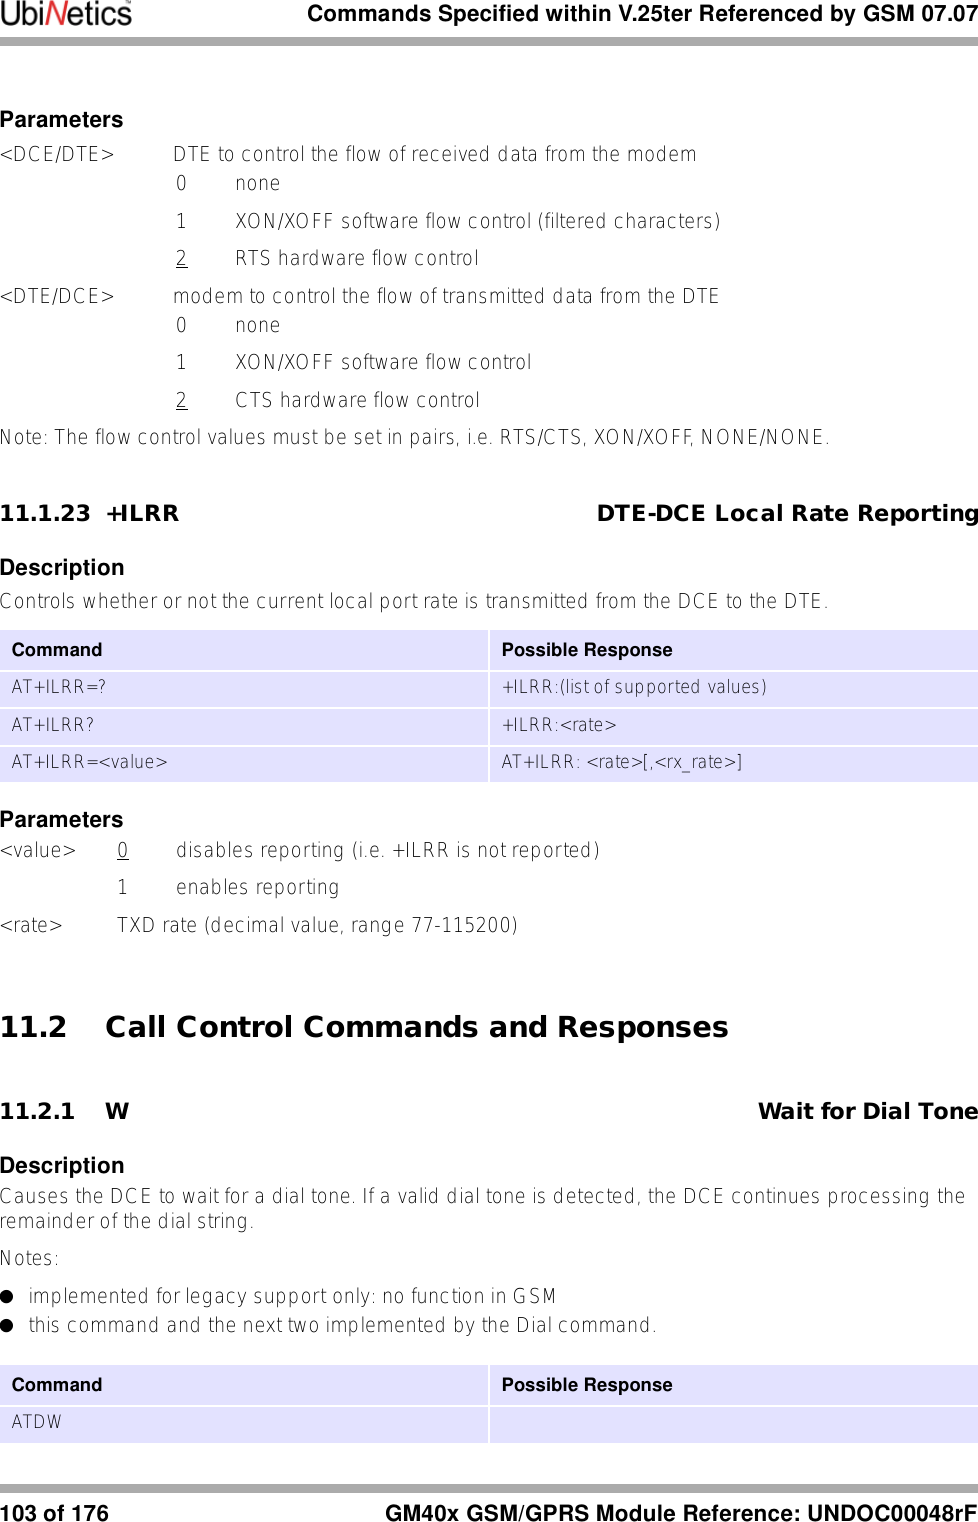 Commands Specified within V.25ter Referenced by GSM 07.07103 of 176 GM40x GSM/GPRS Module Reference: UNDOC00048rFParameters&lt;DCE/DTE&gt; DTE to control the flow of received data from the modem0 none1  XON/XOFF software flow control (filtered characters)2  RTS hardware flow control&lt;DTE/DCE&gt; modem to control the flow of transmitted data from the DTE0 none1  XON/XOFF software flow control2  CTS hardware flow controlNote: The flow control values must be set in pairs, i.e. RTS/CTS, XON/XOFF, NONE/NONE. 11.1.23 +ILRR DTE-DCE Local Rate ReportingDescriptionControls whether or not the current local port rate is transmitted from the DCE to the DTE.Parameters&lt;value&gt; 0 disables reporting (i.e. +ILRR is not reported)1 enables reporting&lt;rate&gt; TXD rate (decimal value, range 77-115200)11.2 Call Control Commands and Responses11.2.1 W Wait for Dial ToneDescriptionCauses the DCE to wait for a dial tone. If a valid dial tone is detected, the DCE continues processing the remainder of the dial string.Notes: ●implemented for legacy support only: no function in GSM●this command and the next two implemented by the Dial command.Command Possible ResponseAT+ILRR=? +ILRR:(list of supported values)AT+ILRR? +ILRR:&lt;rate&gt;AT+ILRR=&lt;value&gt; AT+ILRR: &lt;rate&gt;[,&lt;rx_rate&gt;]Command Possible ResponseATDW